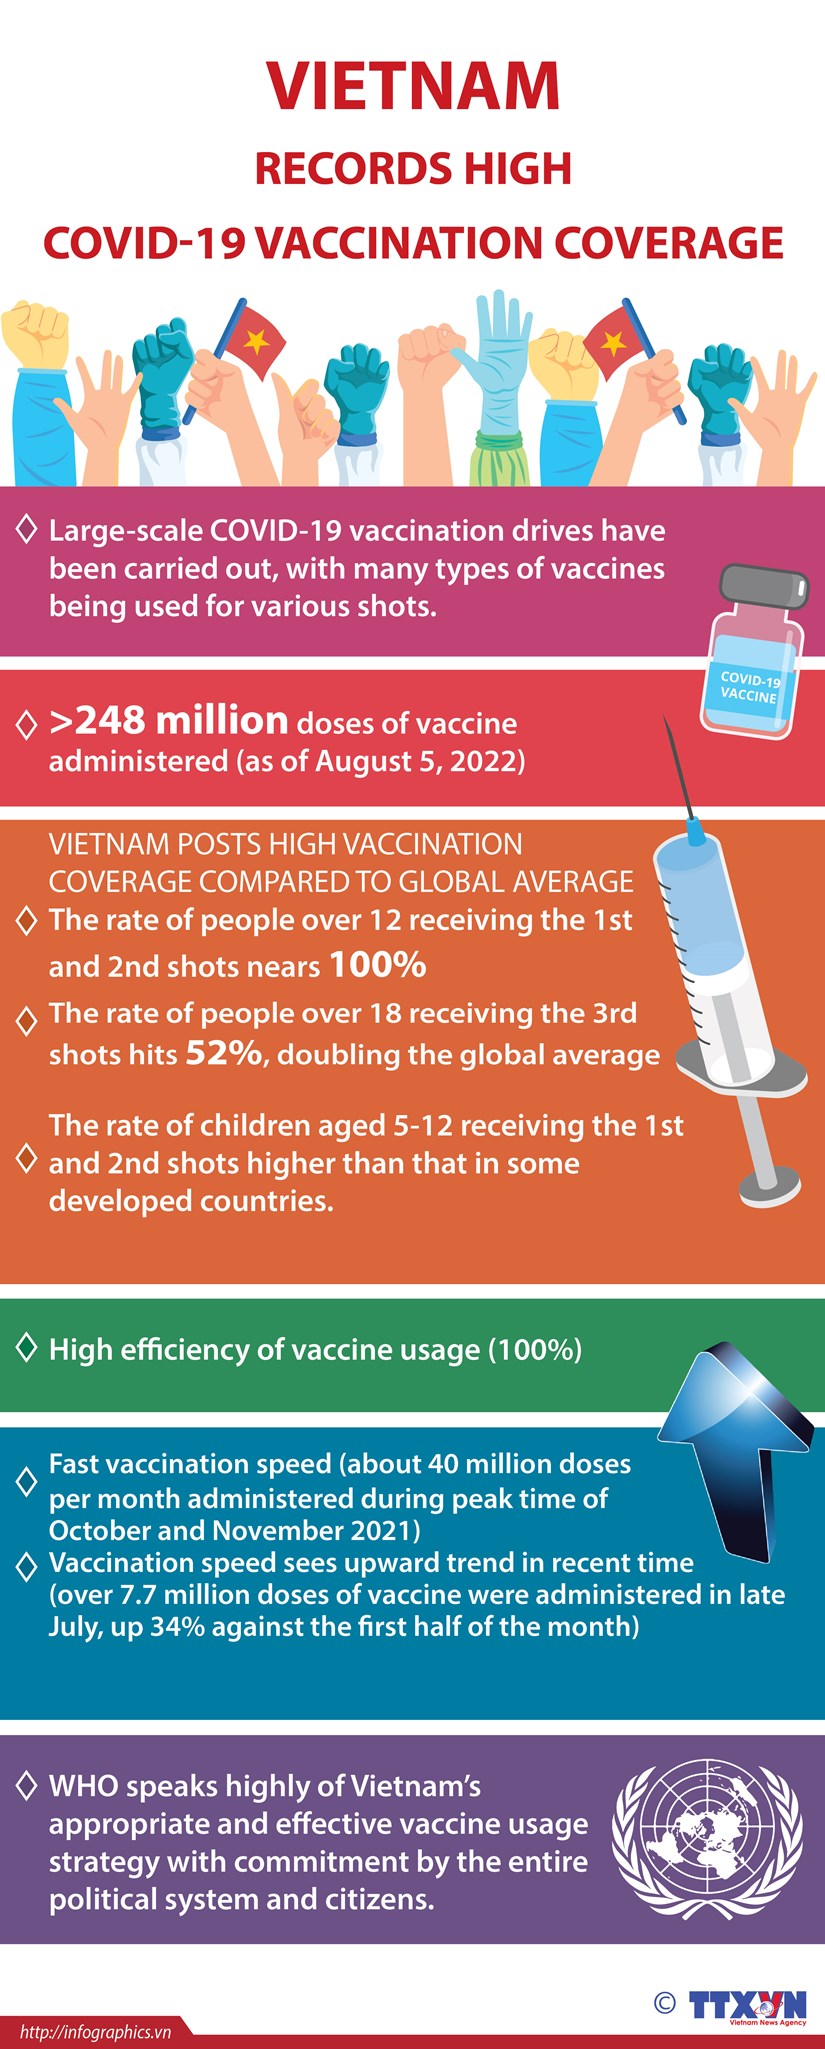 Vietnam records high COVID-19 vaccination coverage hinh anh 1